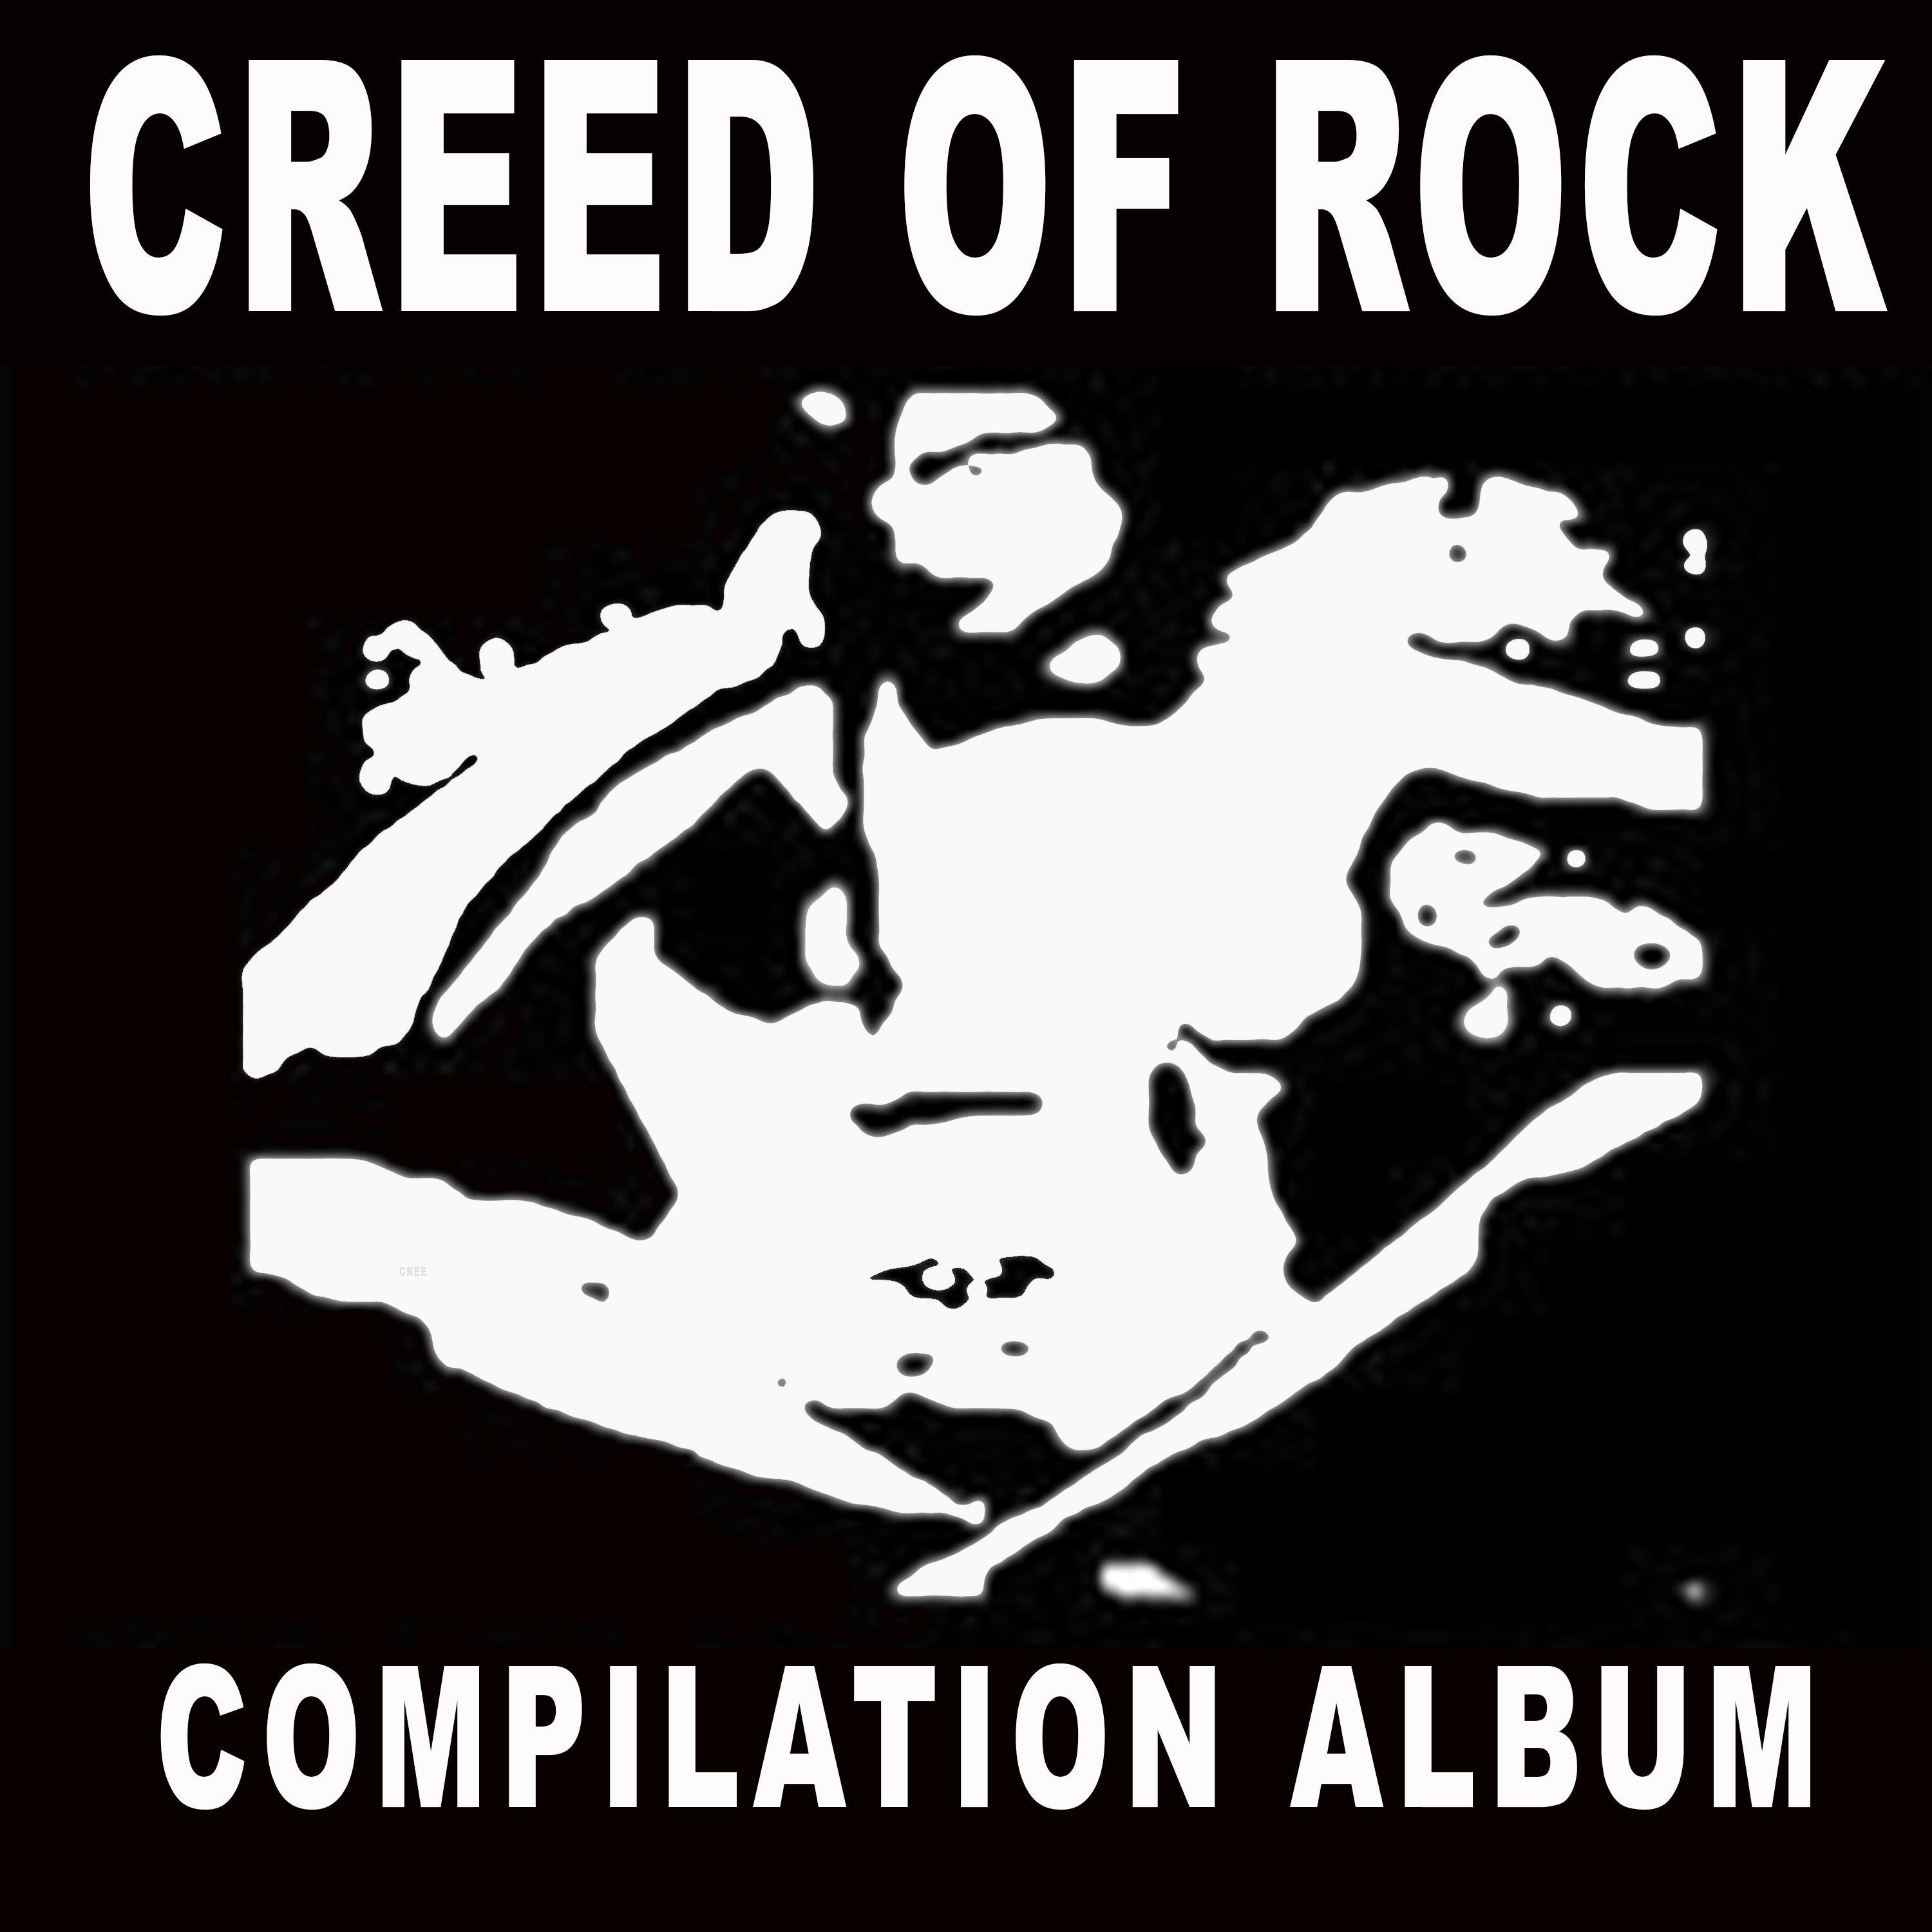 Creed of Rock (Compilation Album)